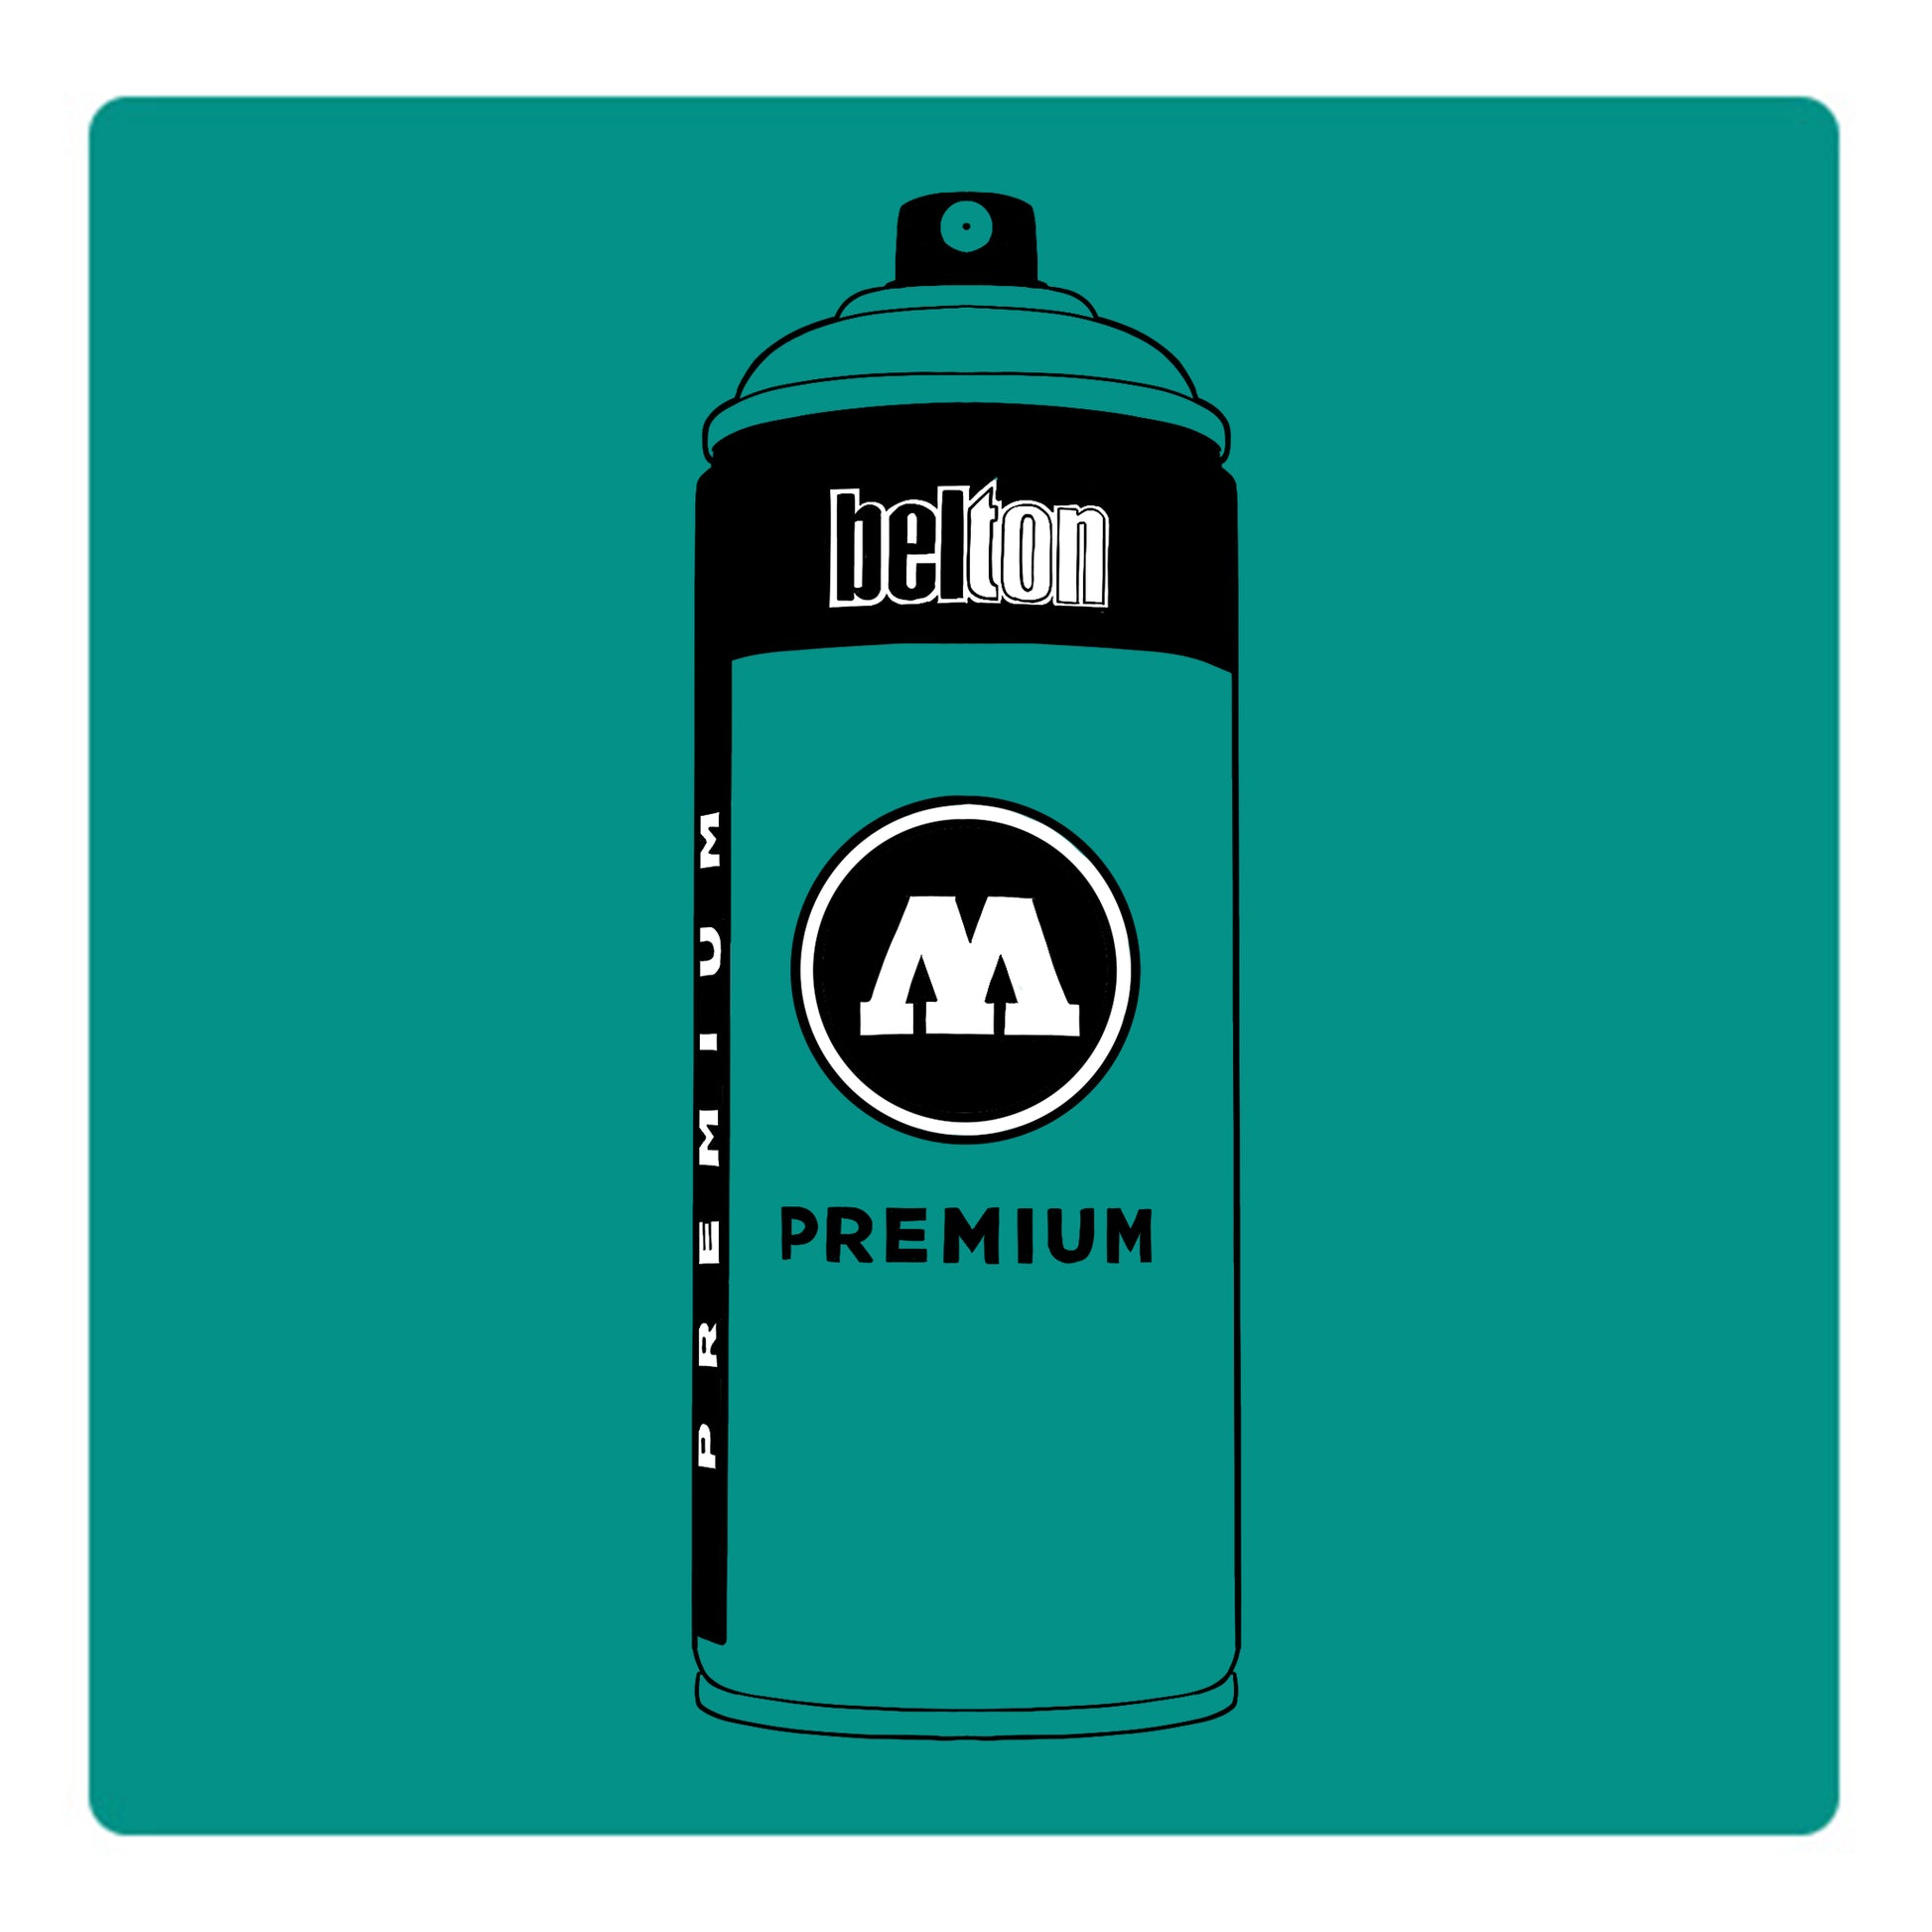 A black outline drawing of a turquoise spray paint can with the words "belton","premium" and the letter"M" written on the face in black and white font. The background is a color swatch of the same Turquoise with a white border